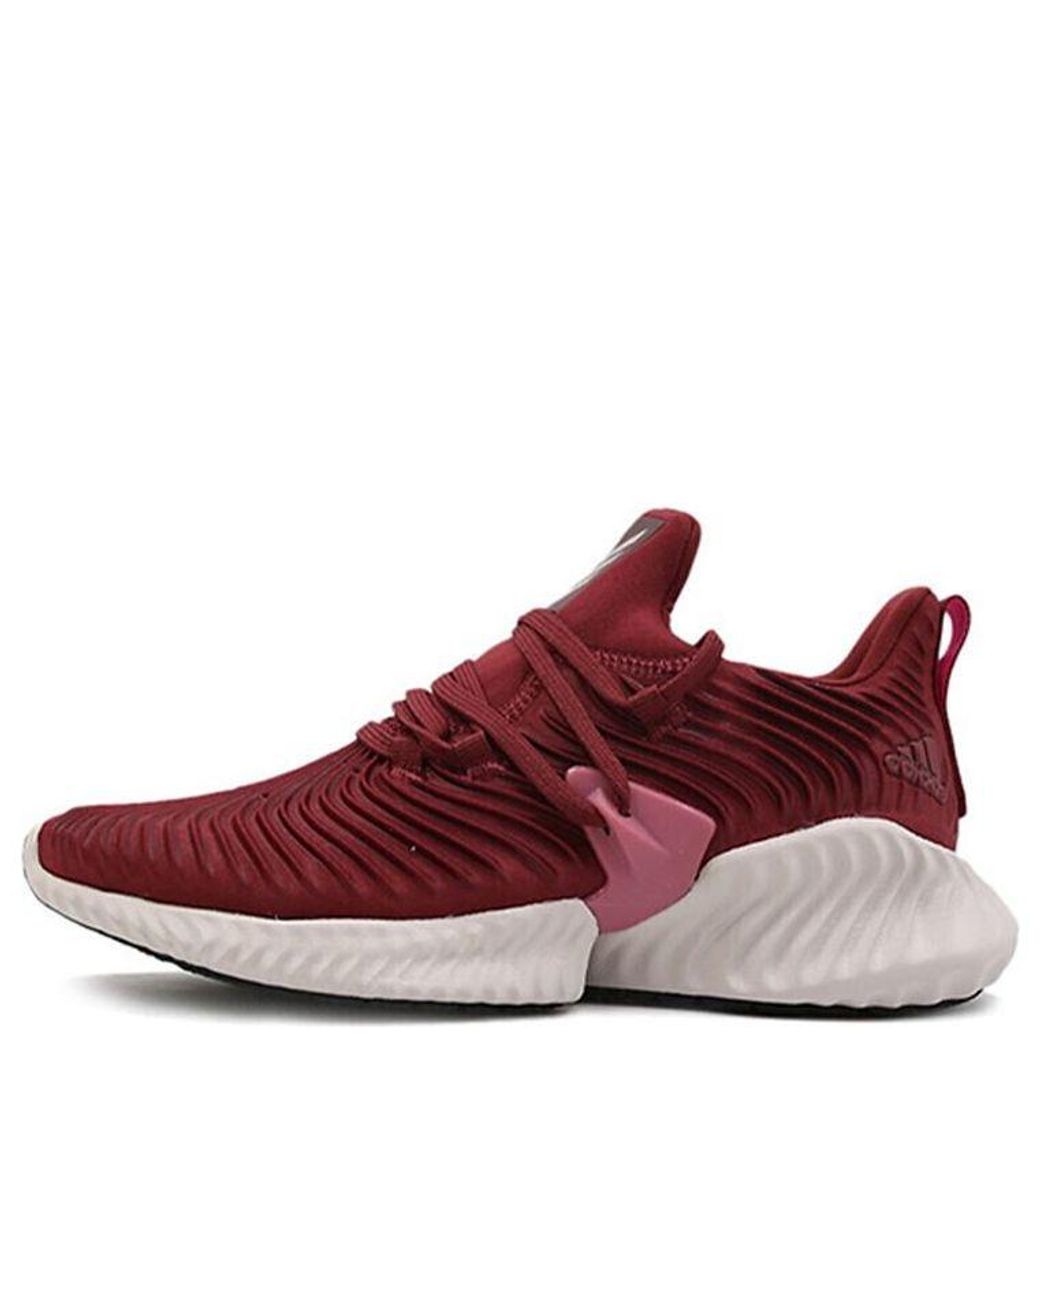 adidas Alphabounce Instinct Shoes in Red | Lyst